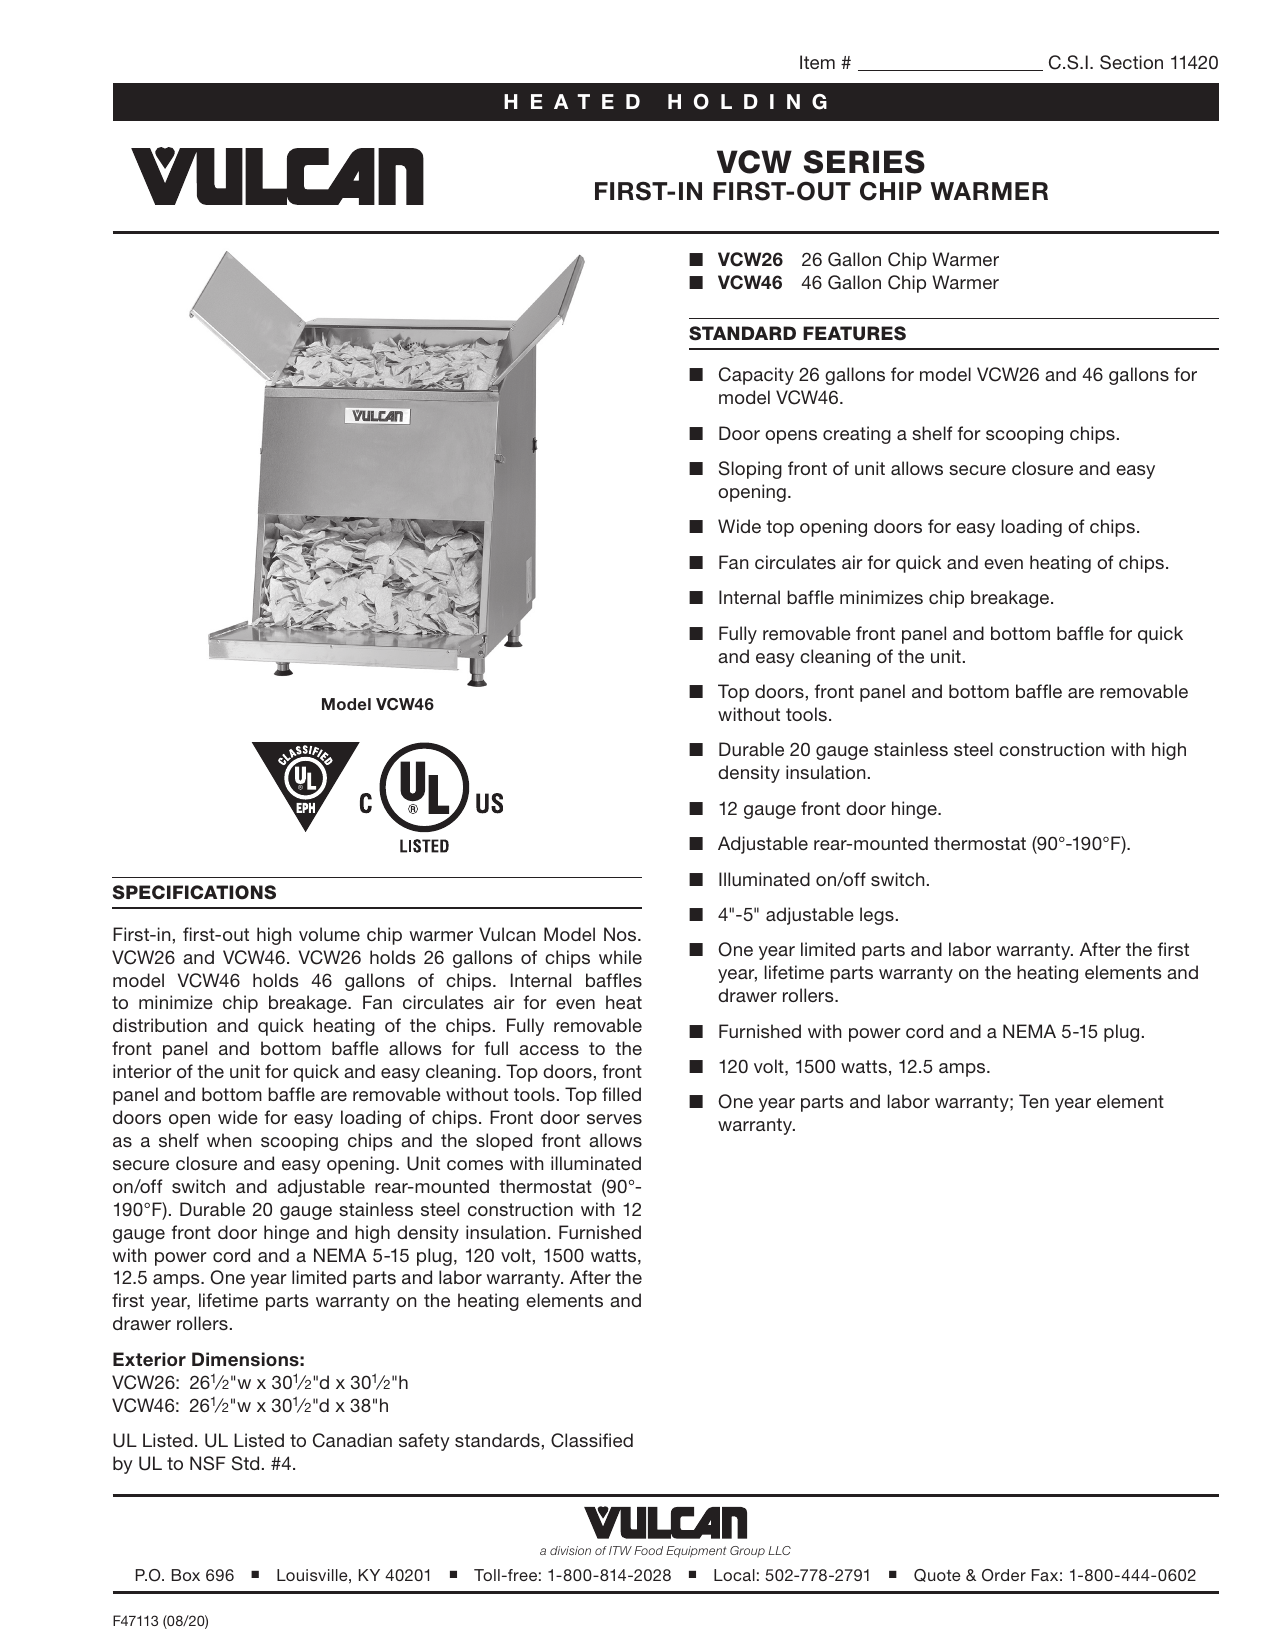 Vulcan VCW26 Top Loading First-In First-Out 26 Gallon Cap Chip Warmer 